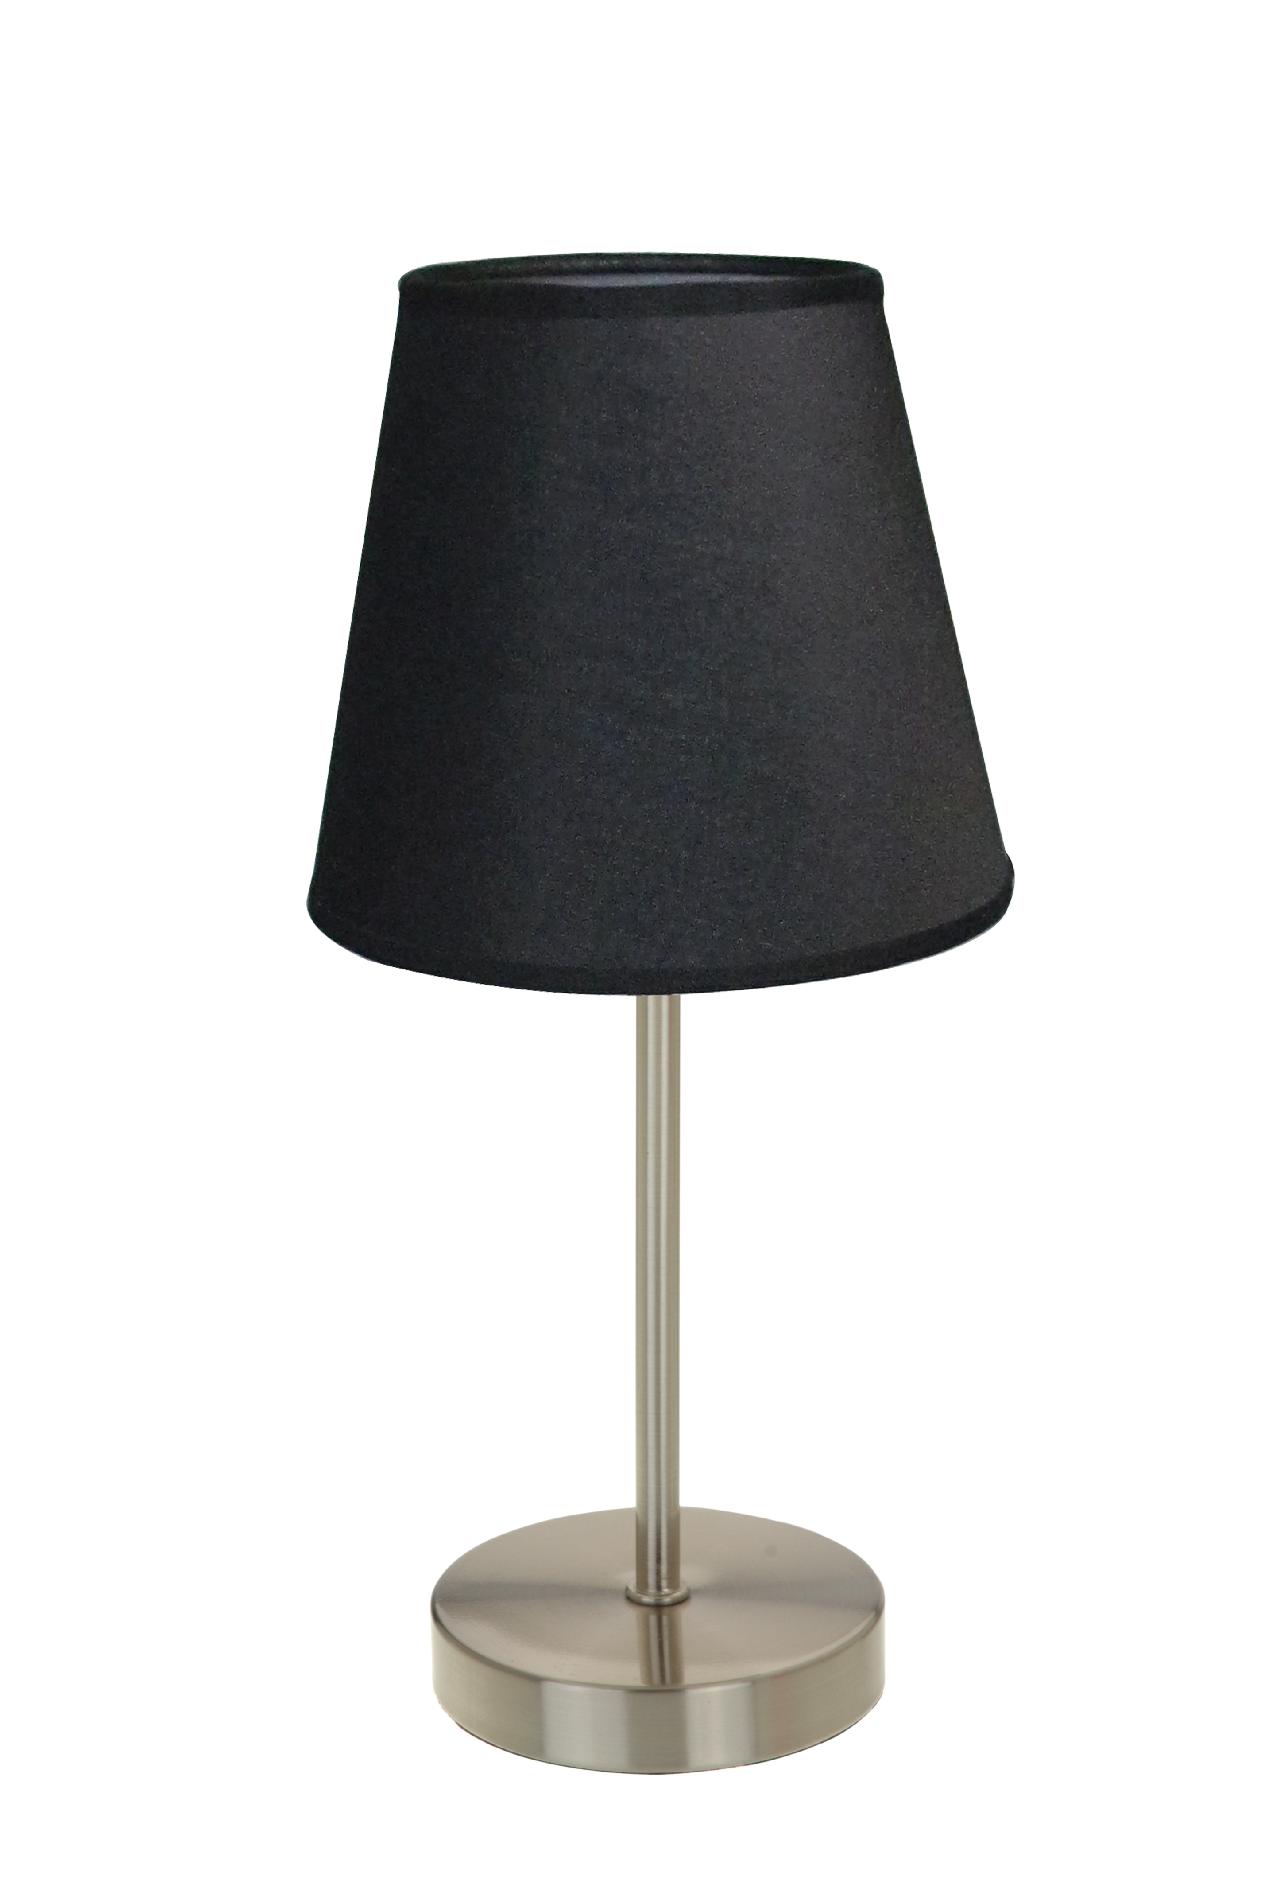 Simple Designs Sand Nickel Mini Basic Table Lamp with Black Shade